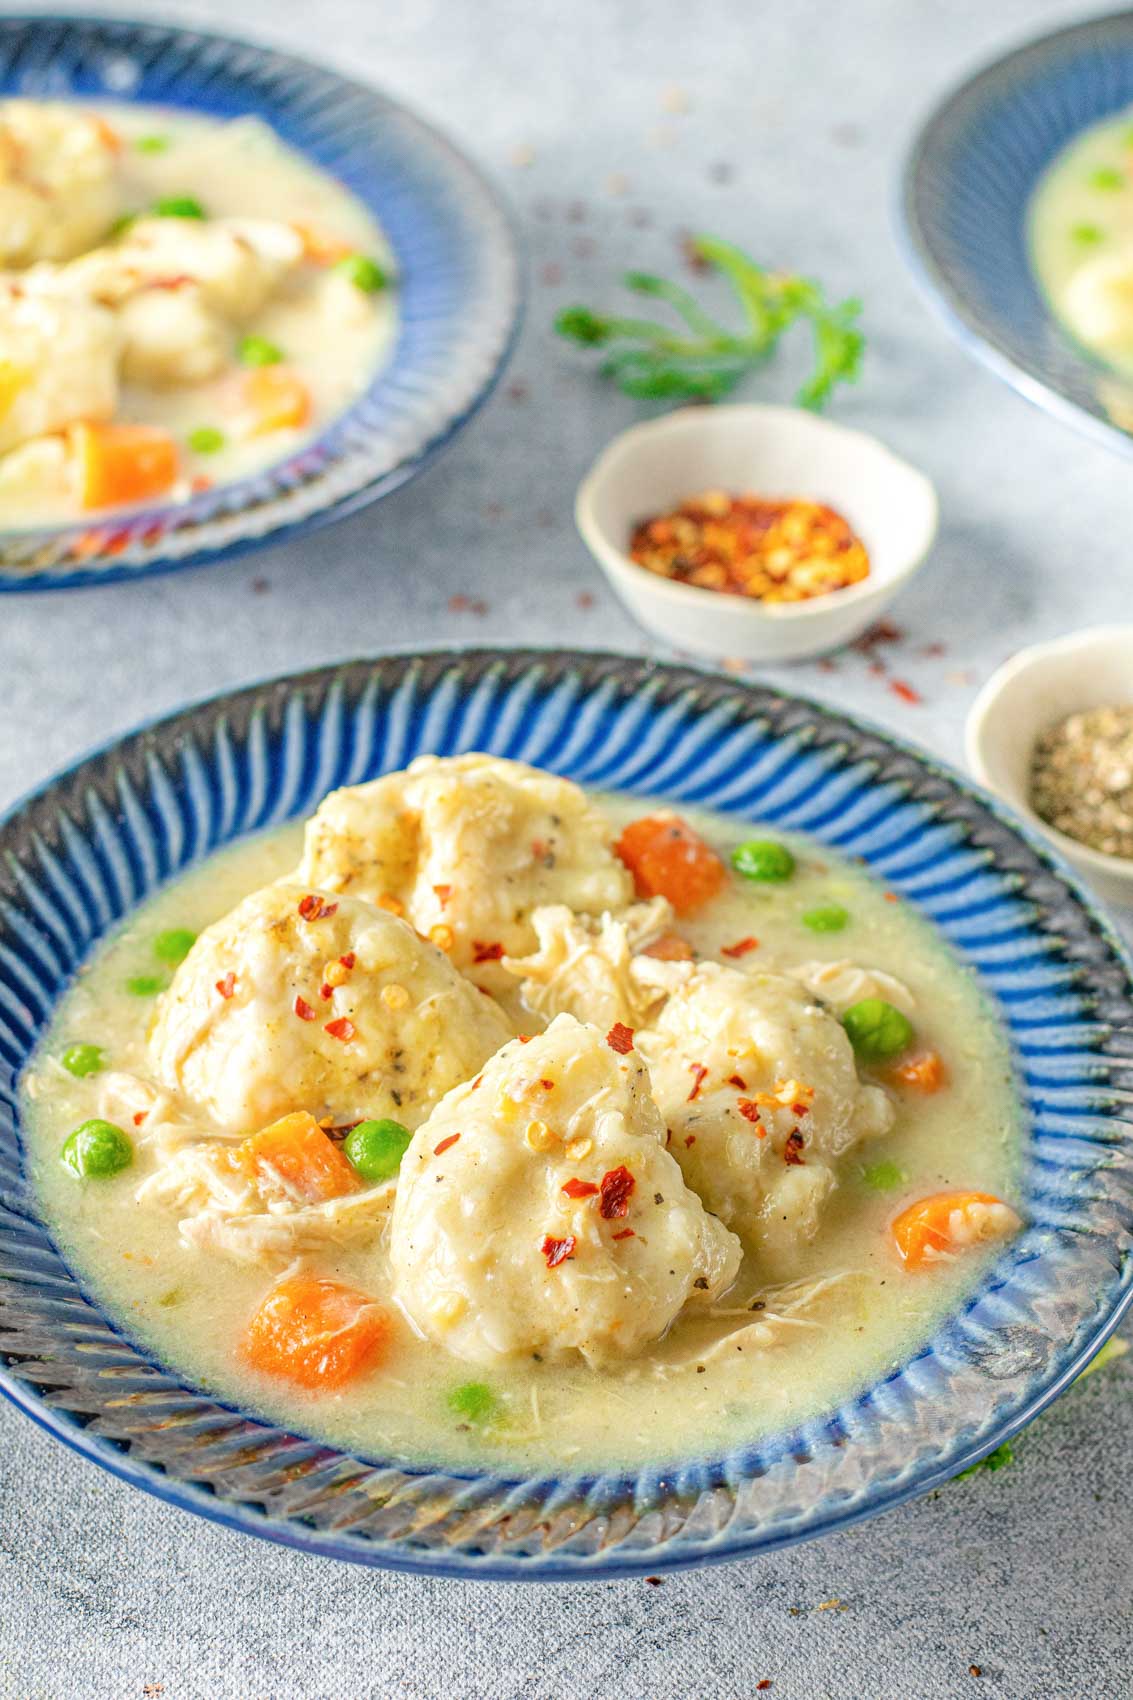 side view of a bowl of chicken and dumplings with peas, carrots, and a thick creamy broth